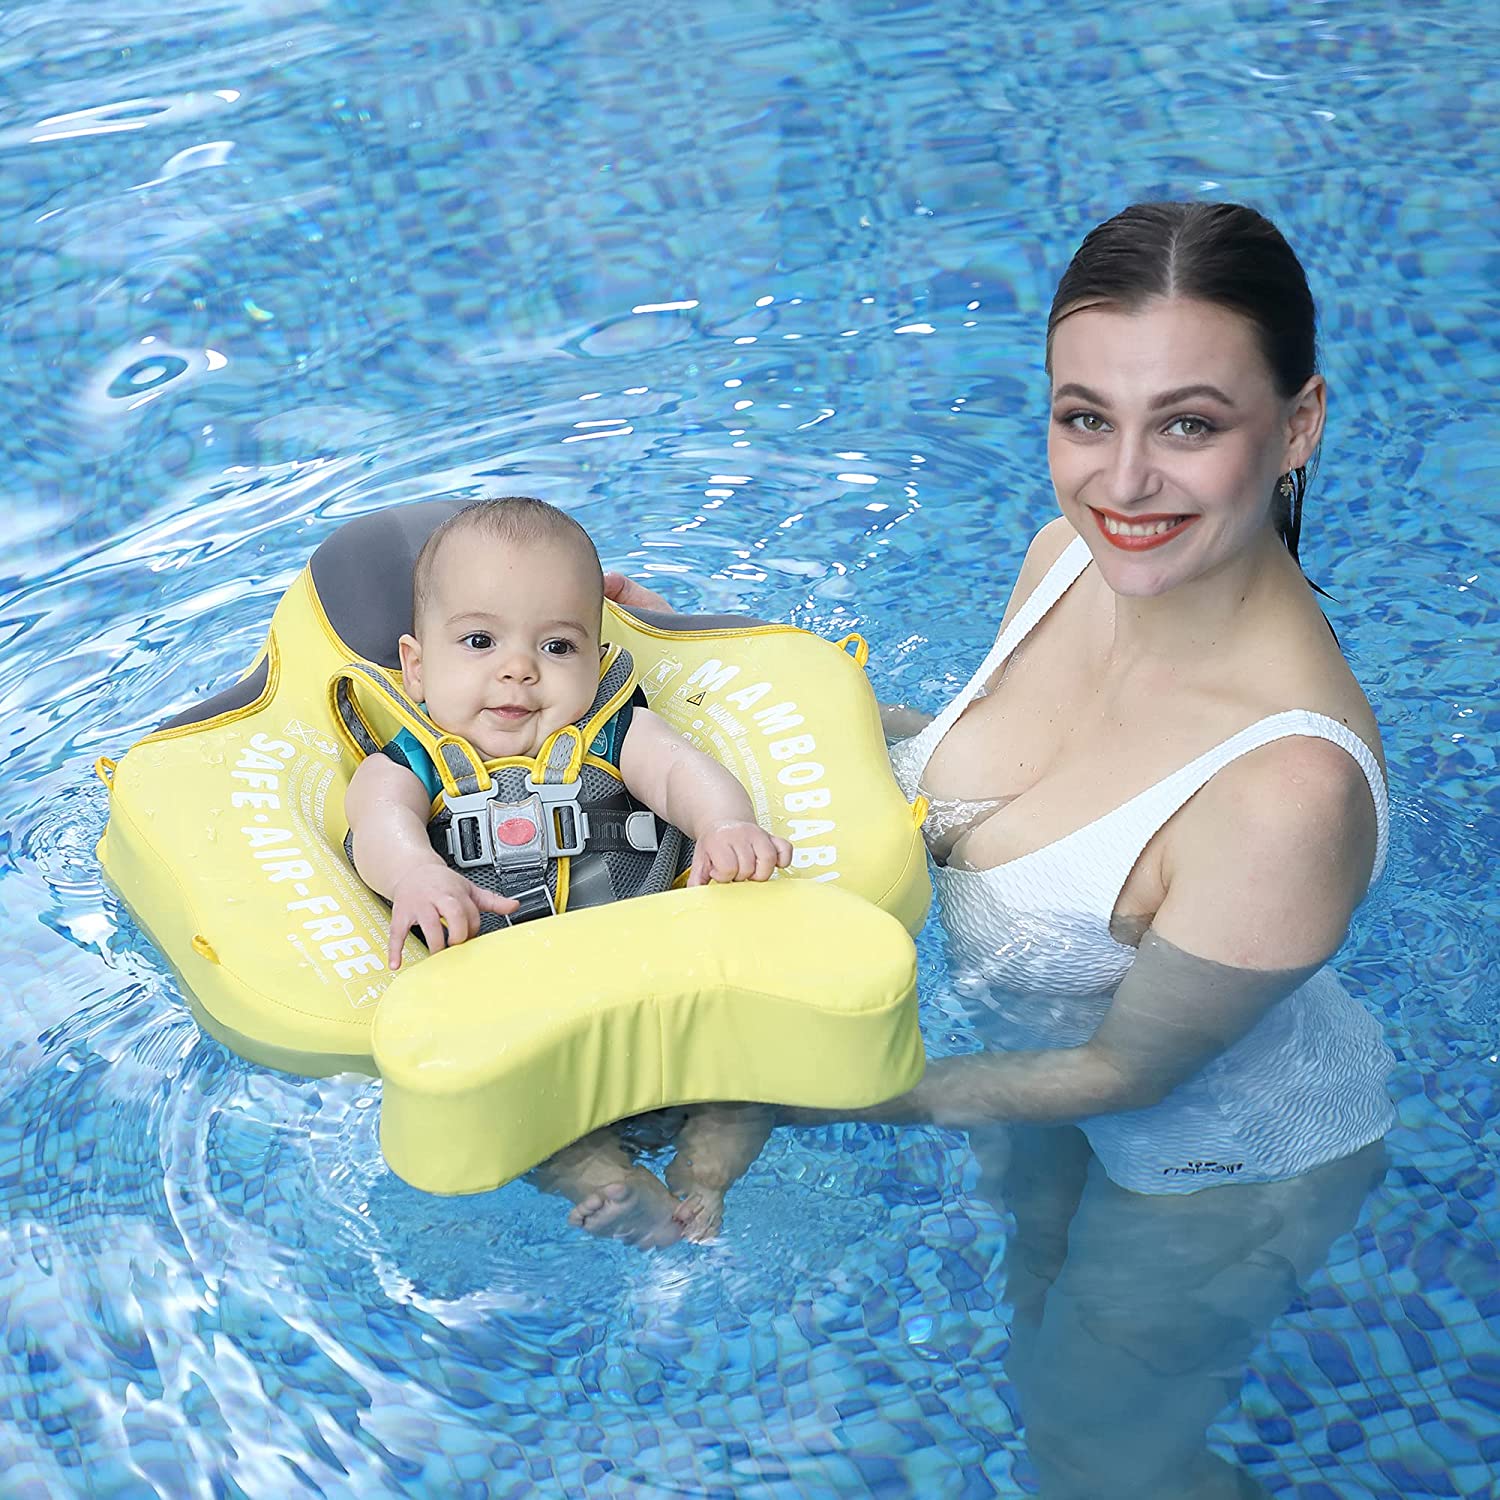 Proactive Baby Mambobaby Baby Swim Float with Canopy, Non-Inflatable Solid Baby Float, Soft Skin-Friendly Fabric Material Infant Float